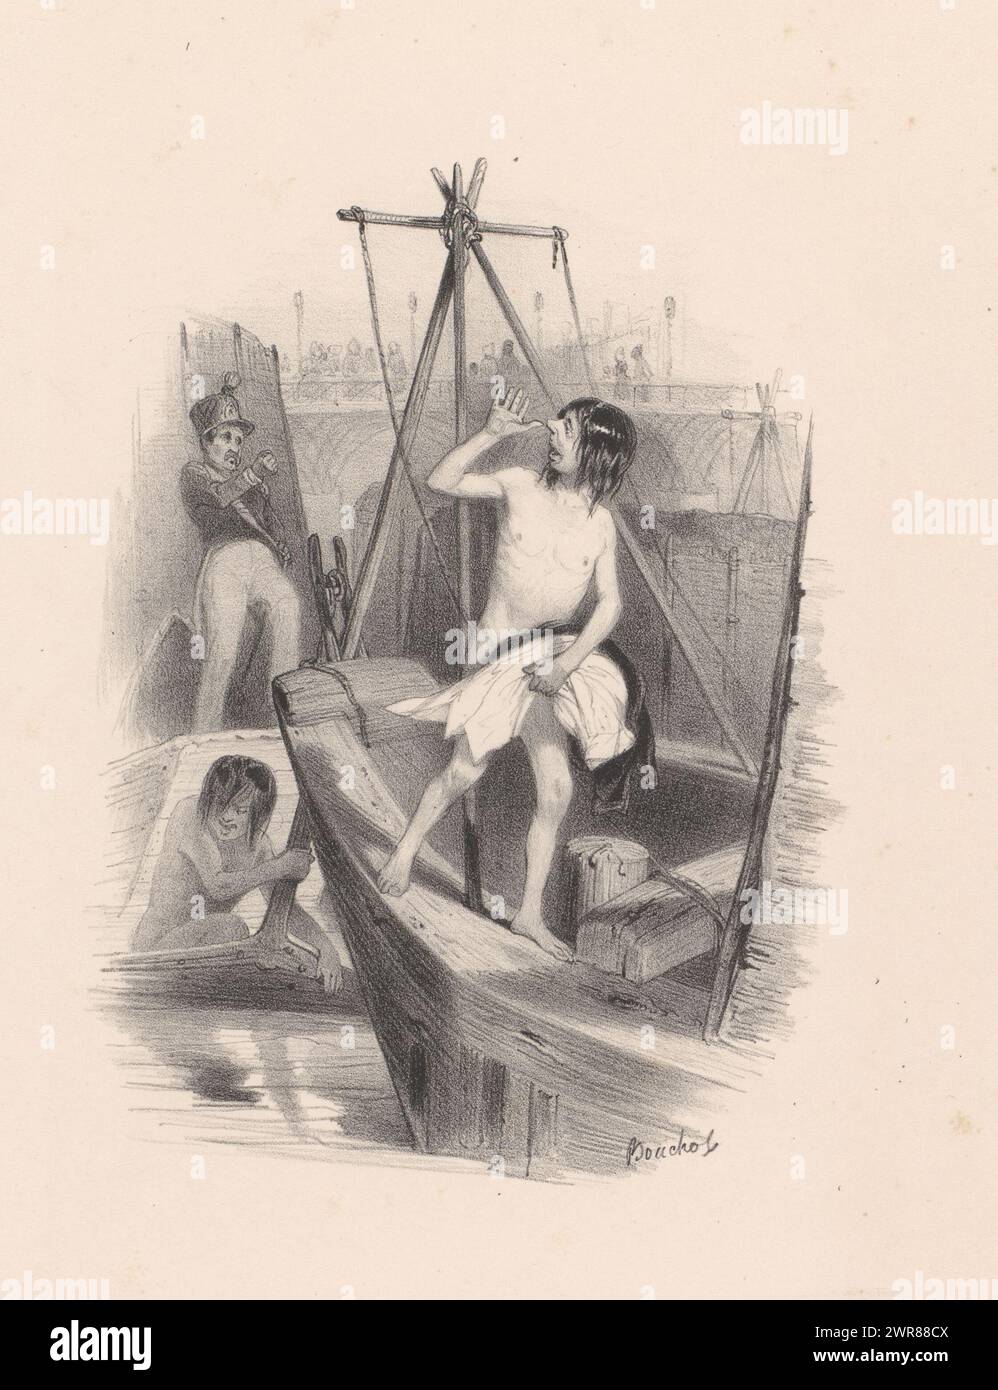 Two naked boys run away on a ship. One of the naked boys, with his clothes under his arm, is already on board the ship. The other boy climbs up. The first boy makes a long nose at the police officer standing on the side. He clenches his fist at him., print maker: Frédéric Bouchot, Paris, in or after 1827 - in or before 1860, paper, height 318 mm × width 247 mm, print Stock Photo